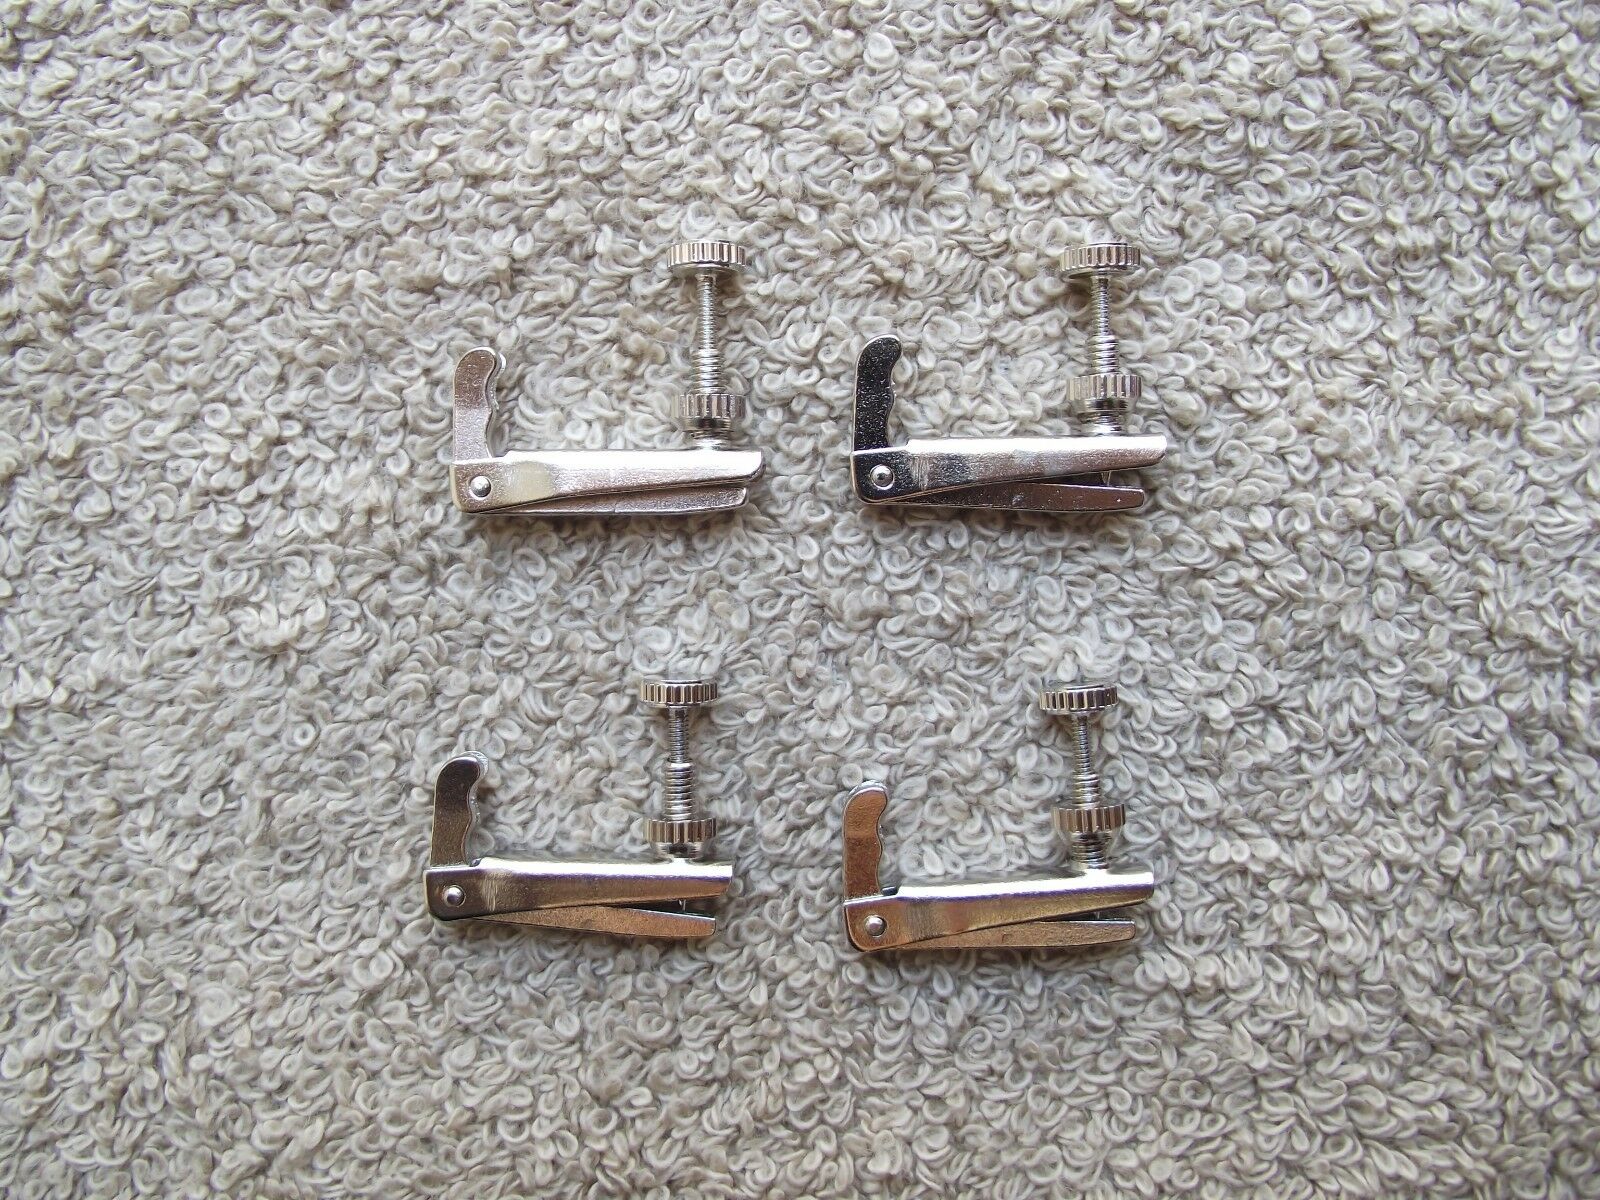 High quality stainless steel 4/4 3/4 Violin fine tuners(4 pieces)Free shipping)